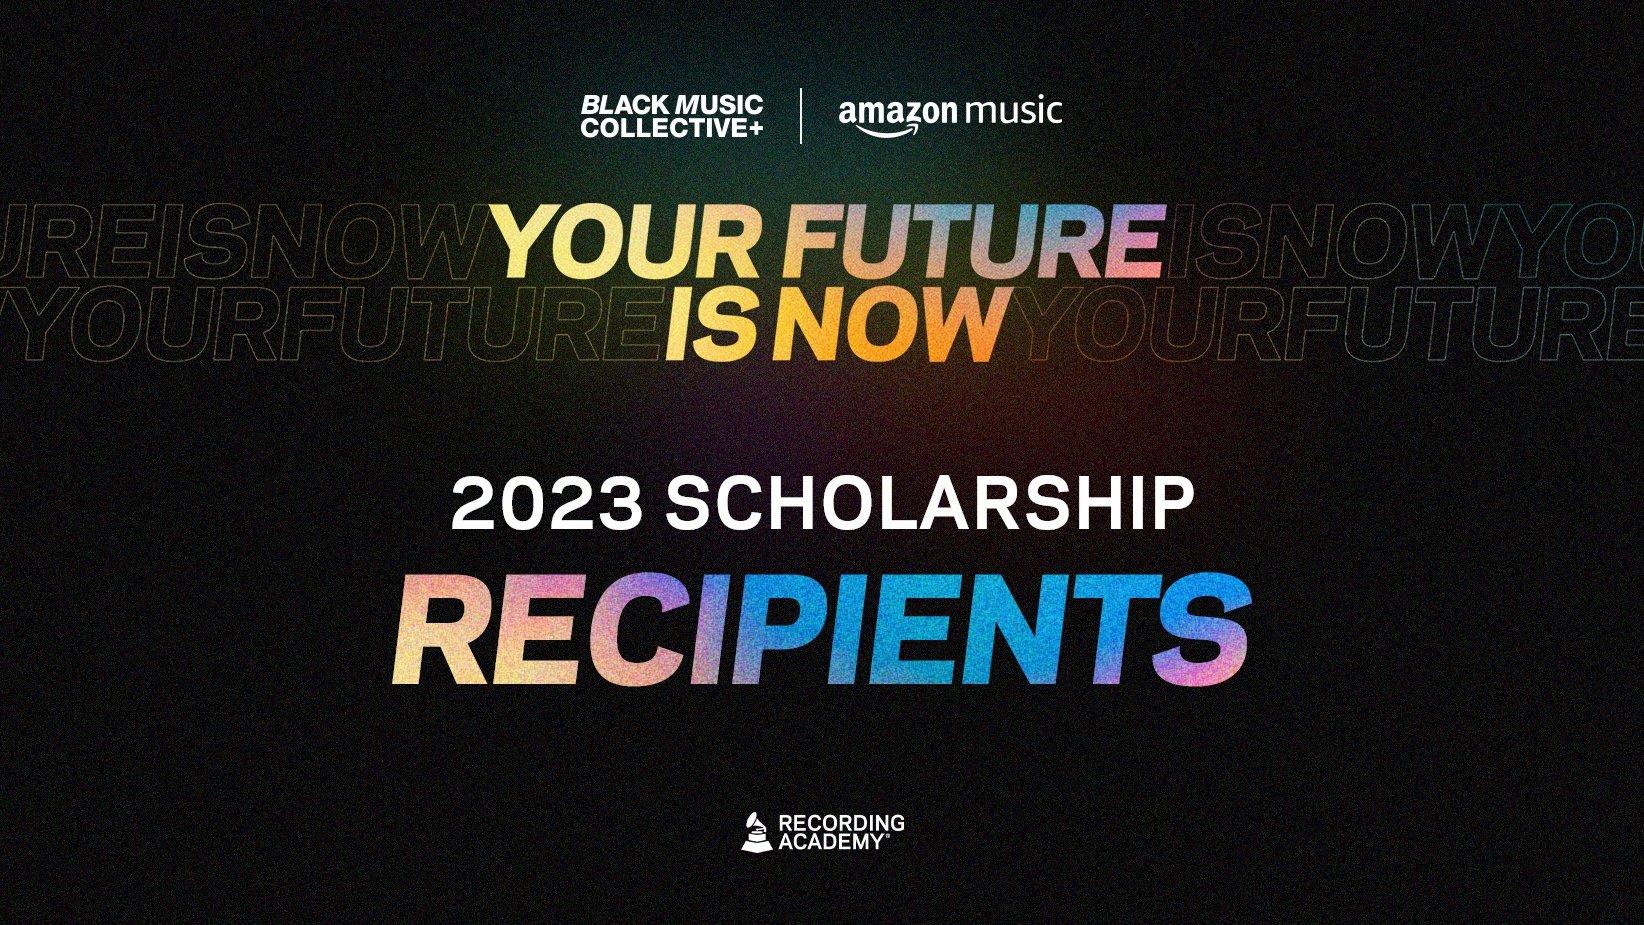 Graphic announcing the recipients of the 2023 "Your Future Is Now" scholarship program, presented by the Recording Academy's Black Music Collective (BMC) and Amazon Music